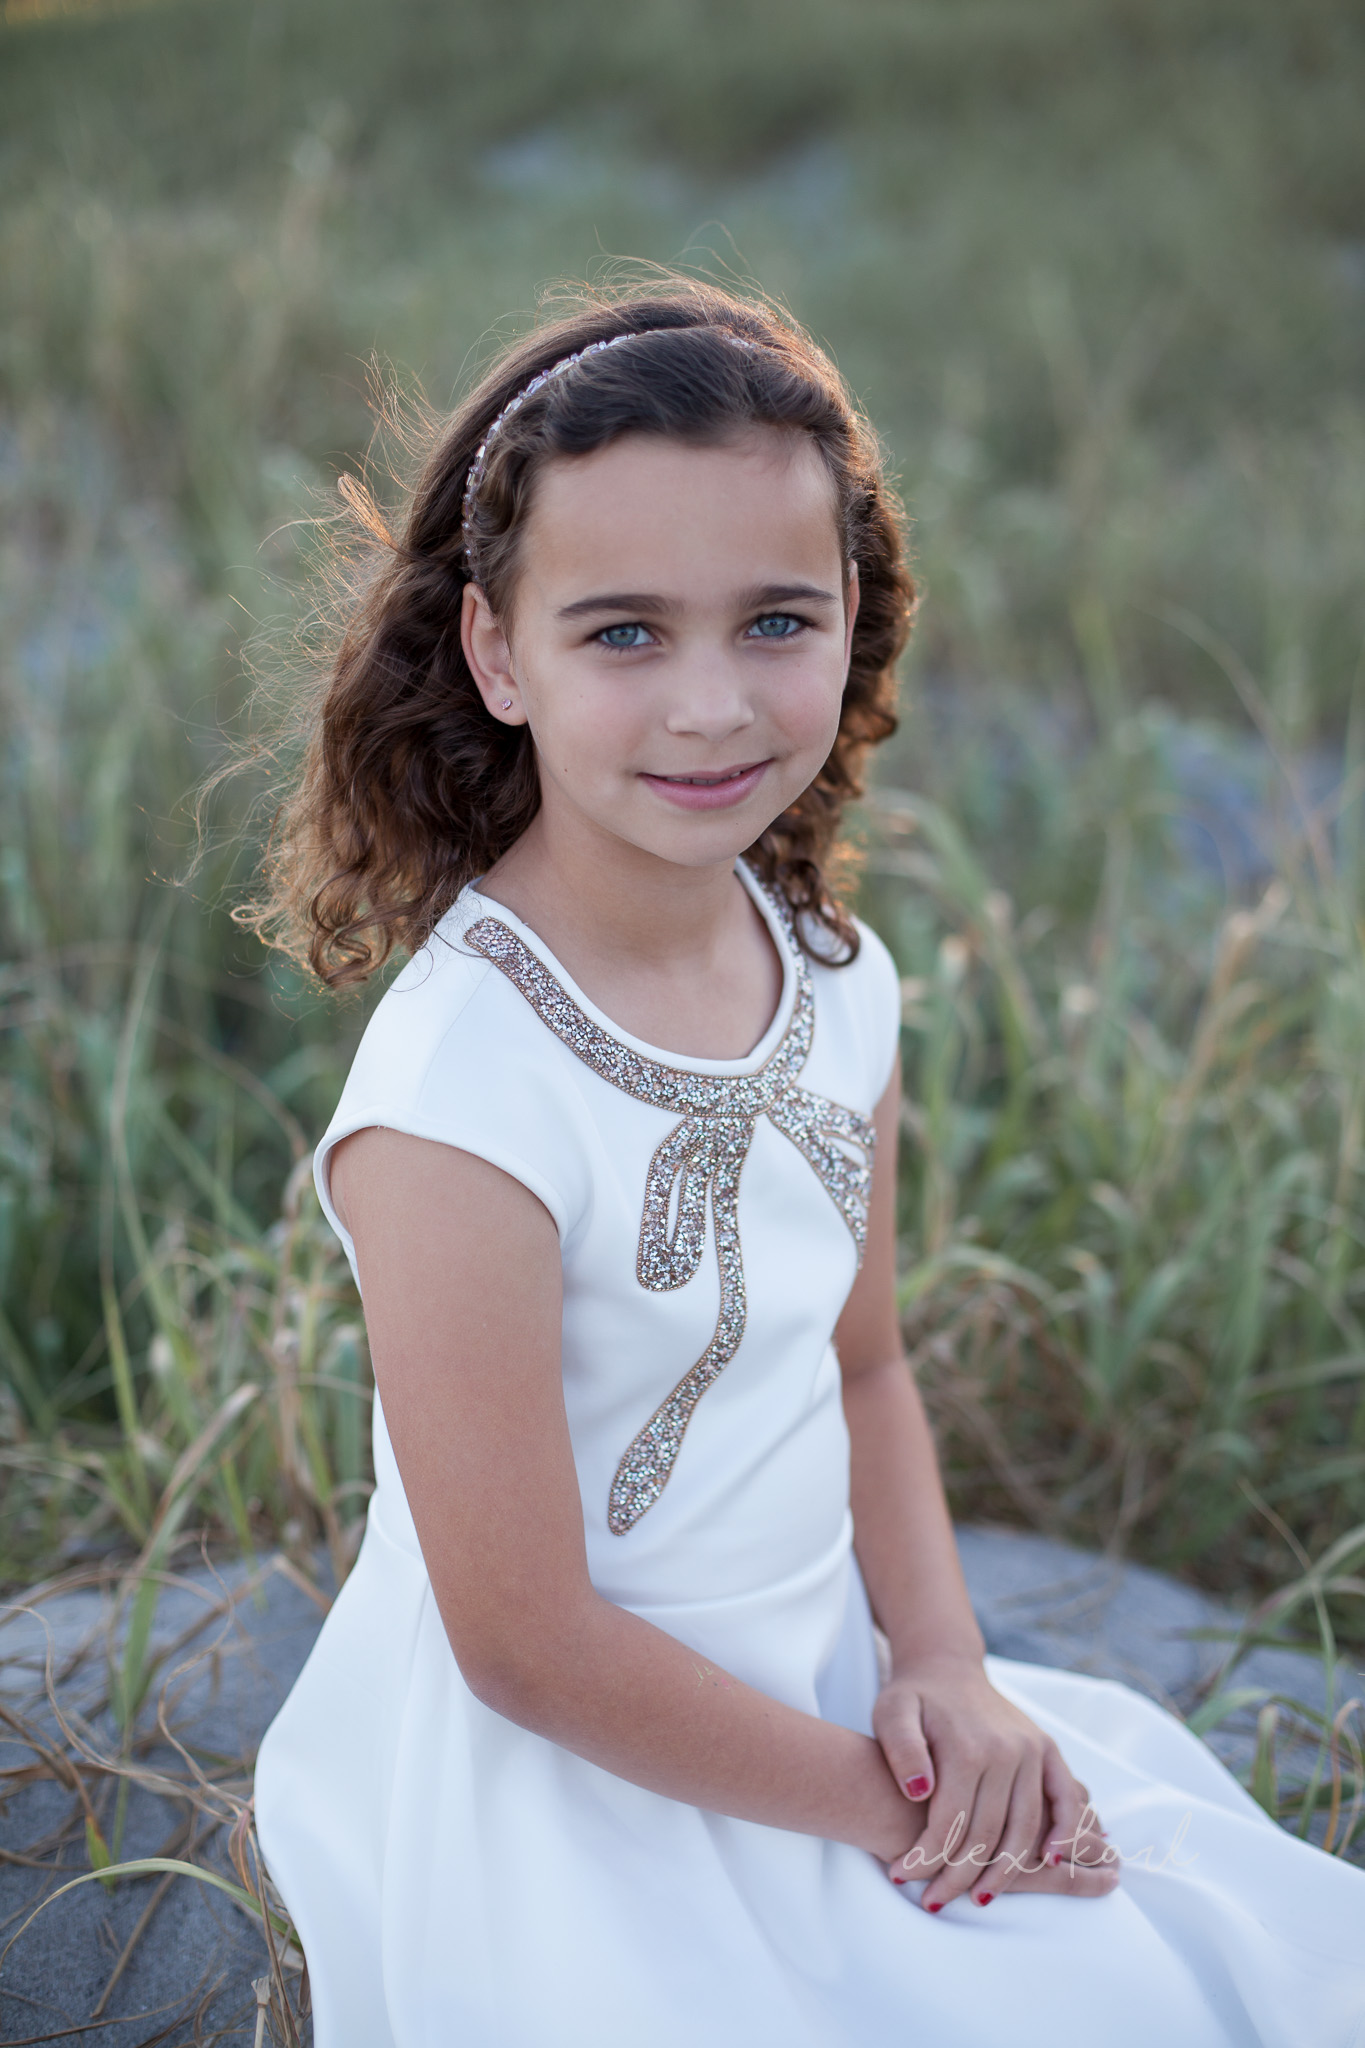 A child smiles sweetly | Alex Karl Photography | Palm Beach Family Photographer